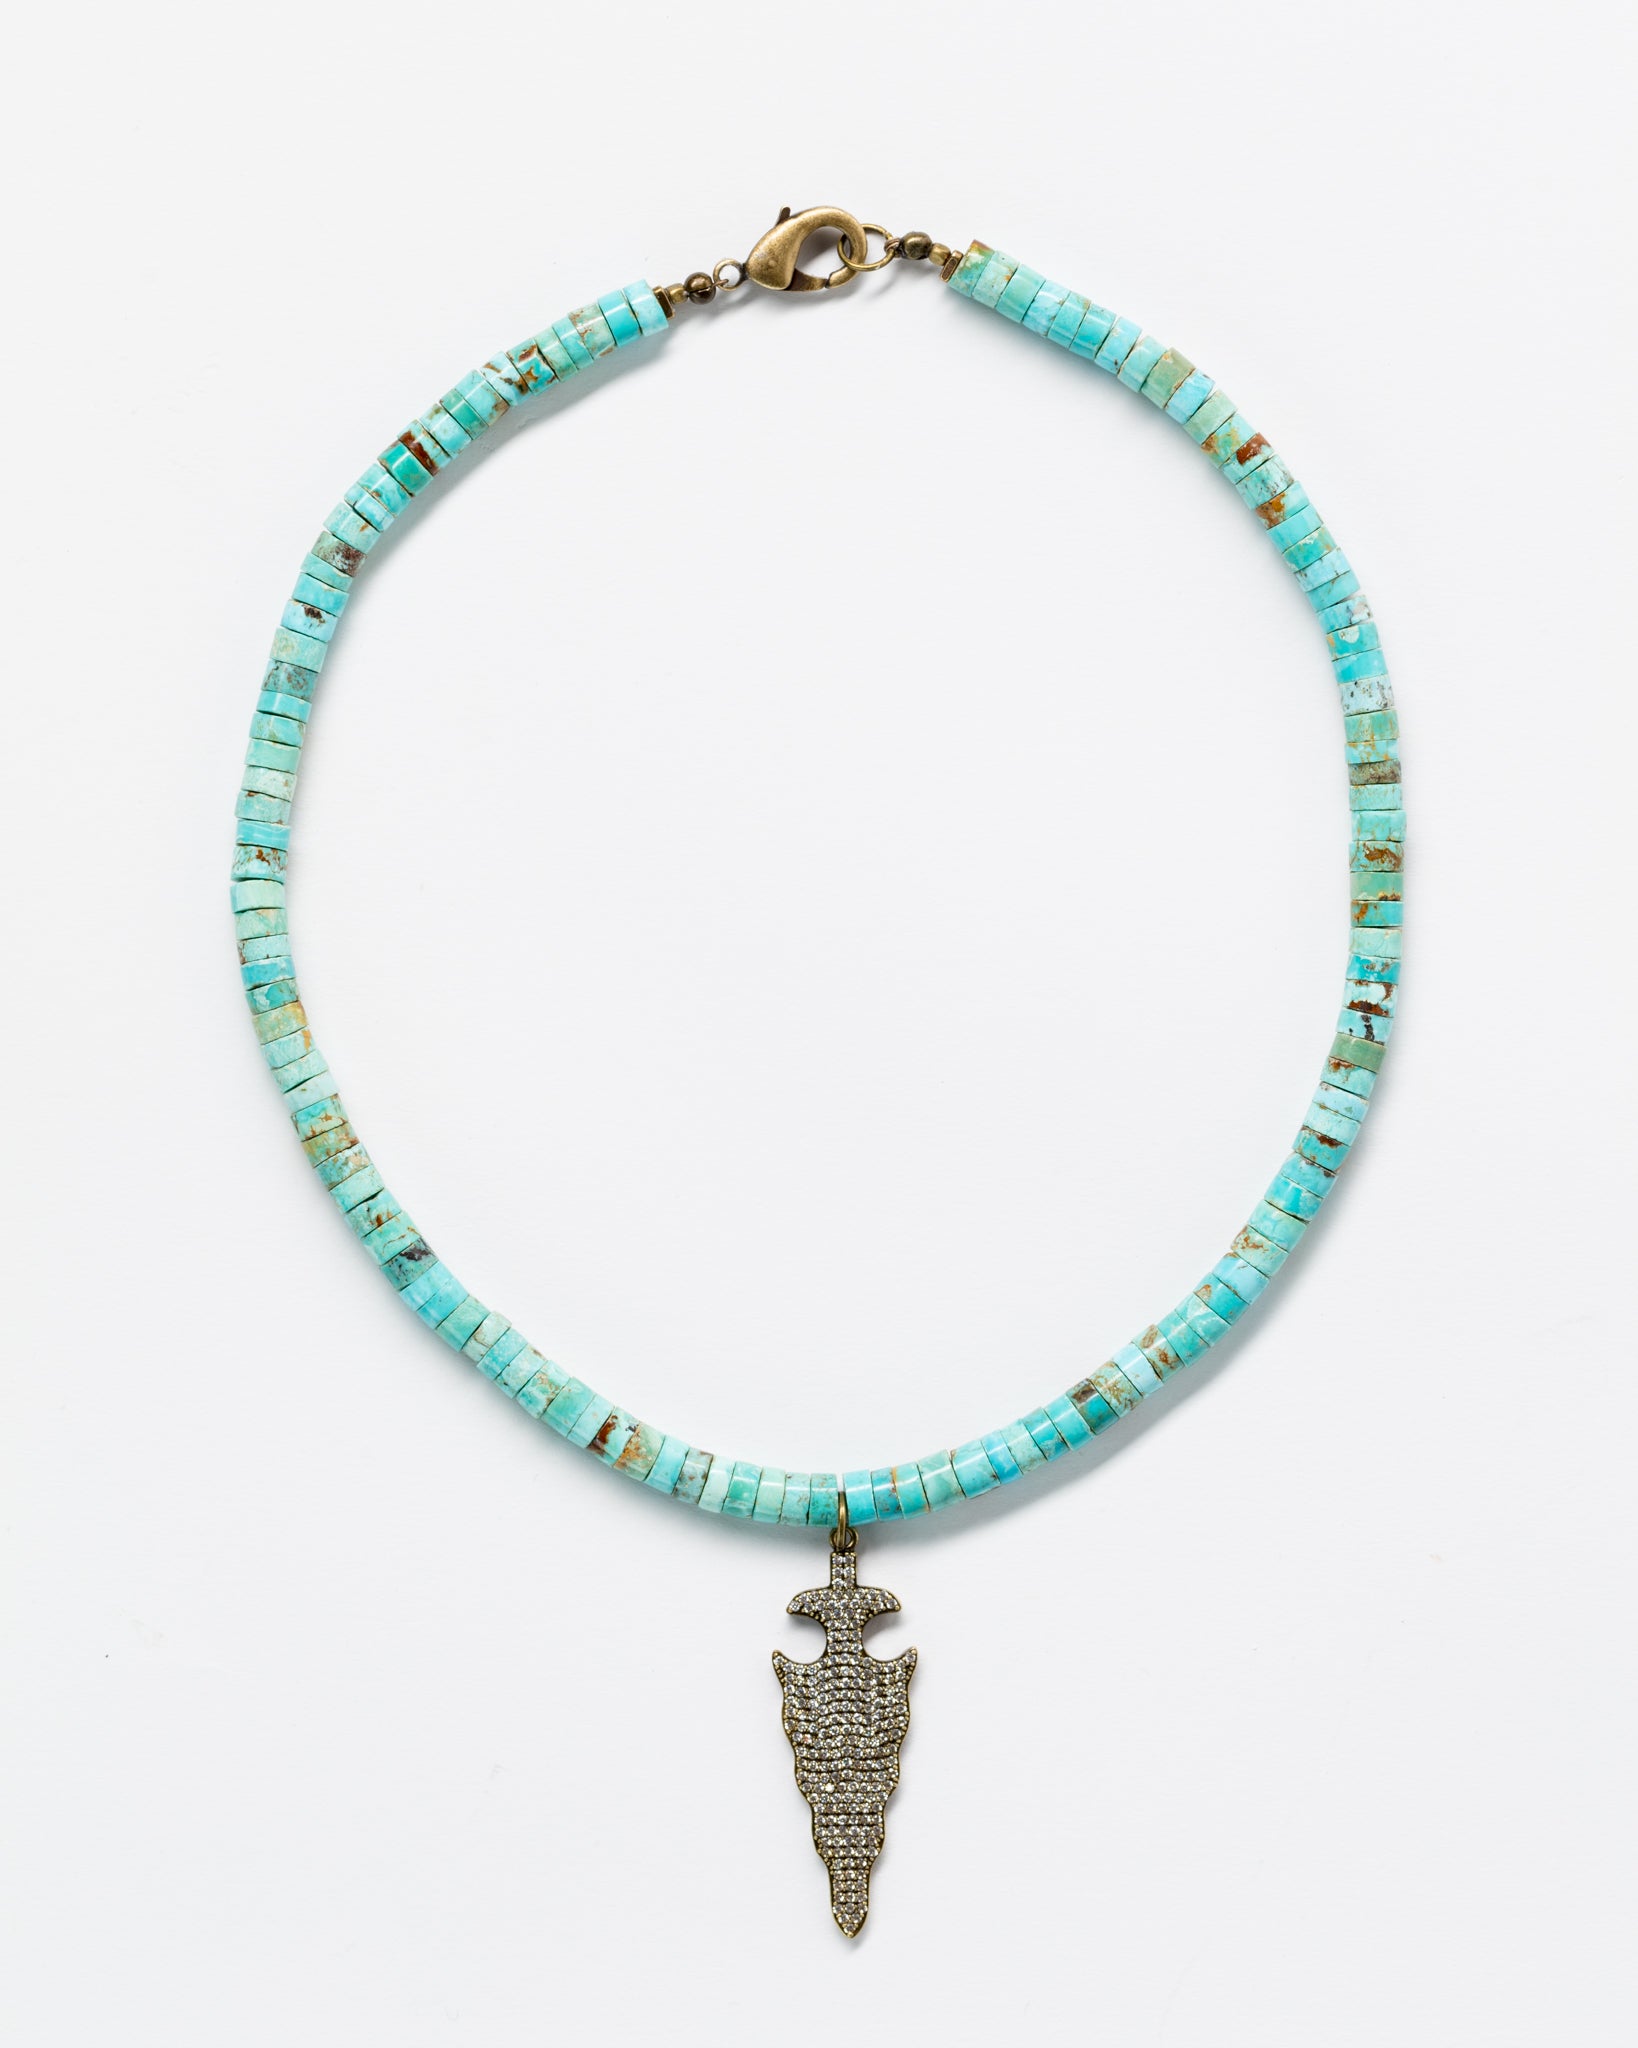 A Designs By Raya necklace with turquoise and gold beads in an Arizona style and a detailed gold pendant shaped like an arrowhead, displayed against a plain white background.